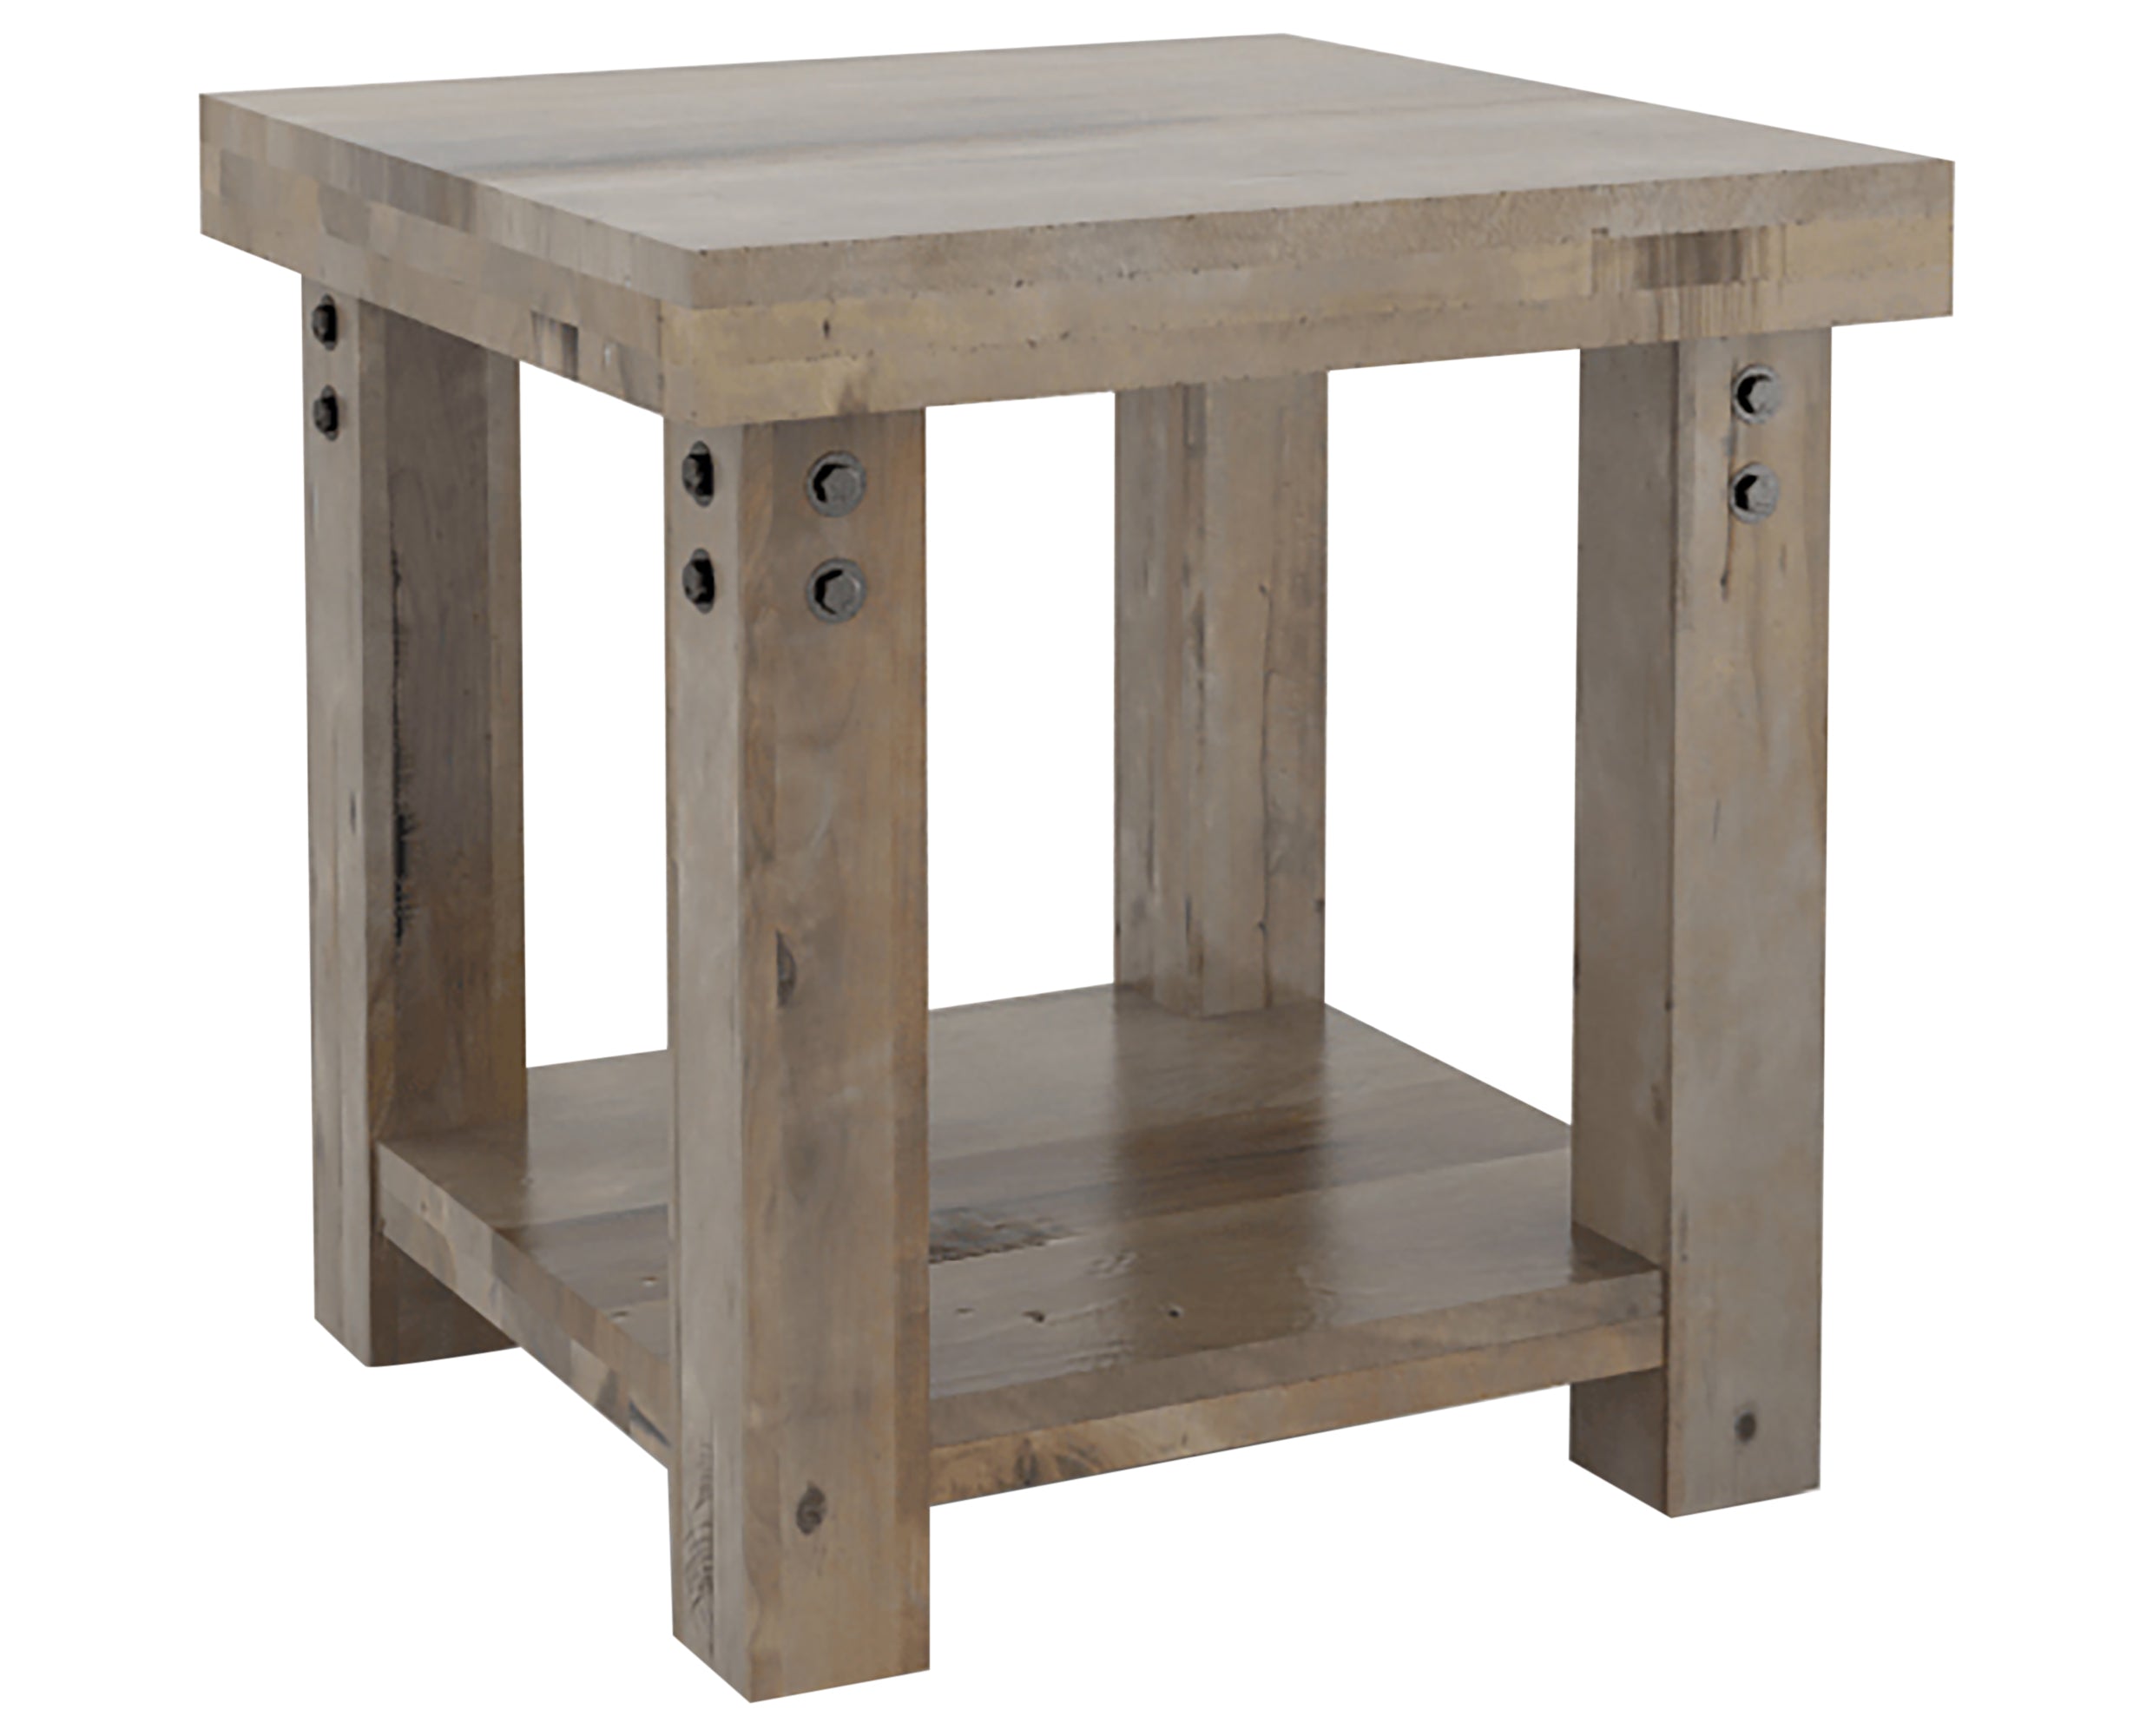 Shadow with HJ Legs | Canadel Loft End Table 2424 | Valley Ridge Furniture